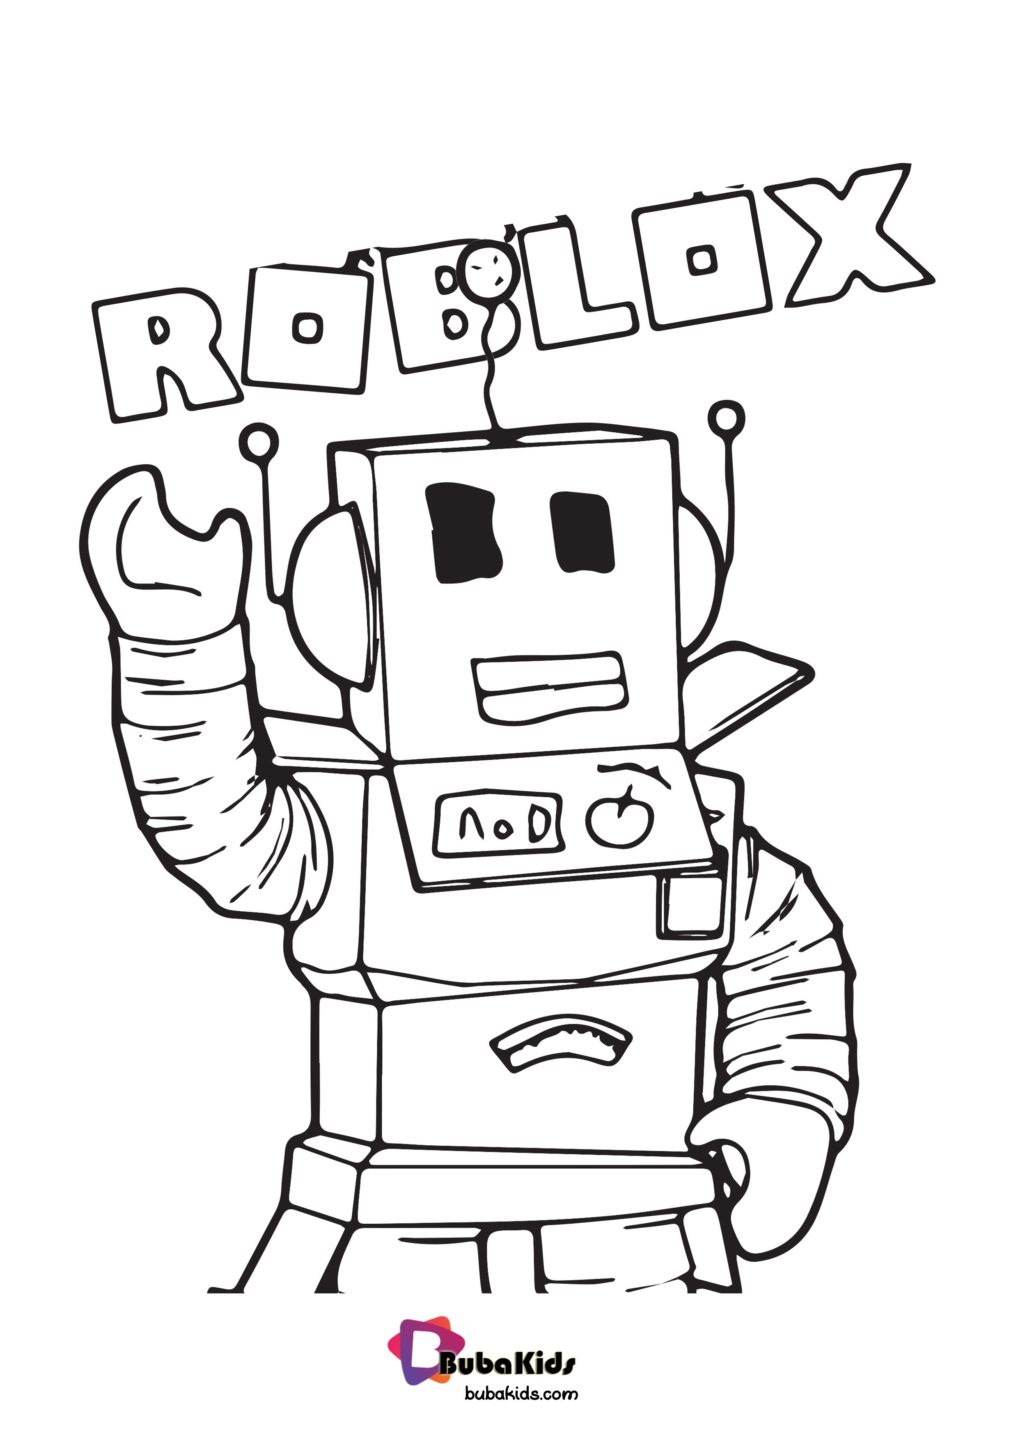 Doge Roblox Coloring Pages - How To Draw Blue Dog From Roblox Adopt Me